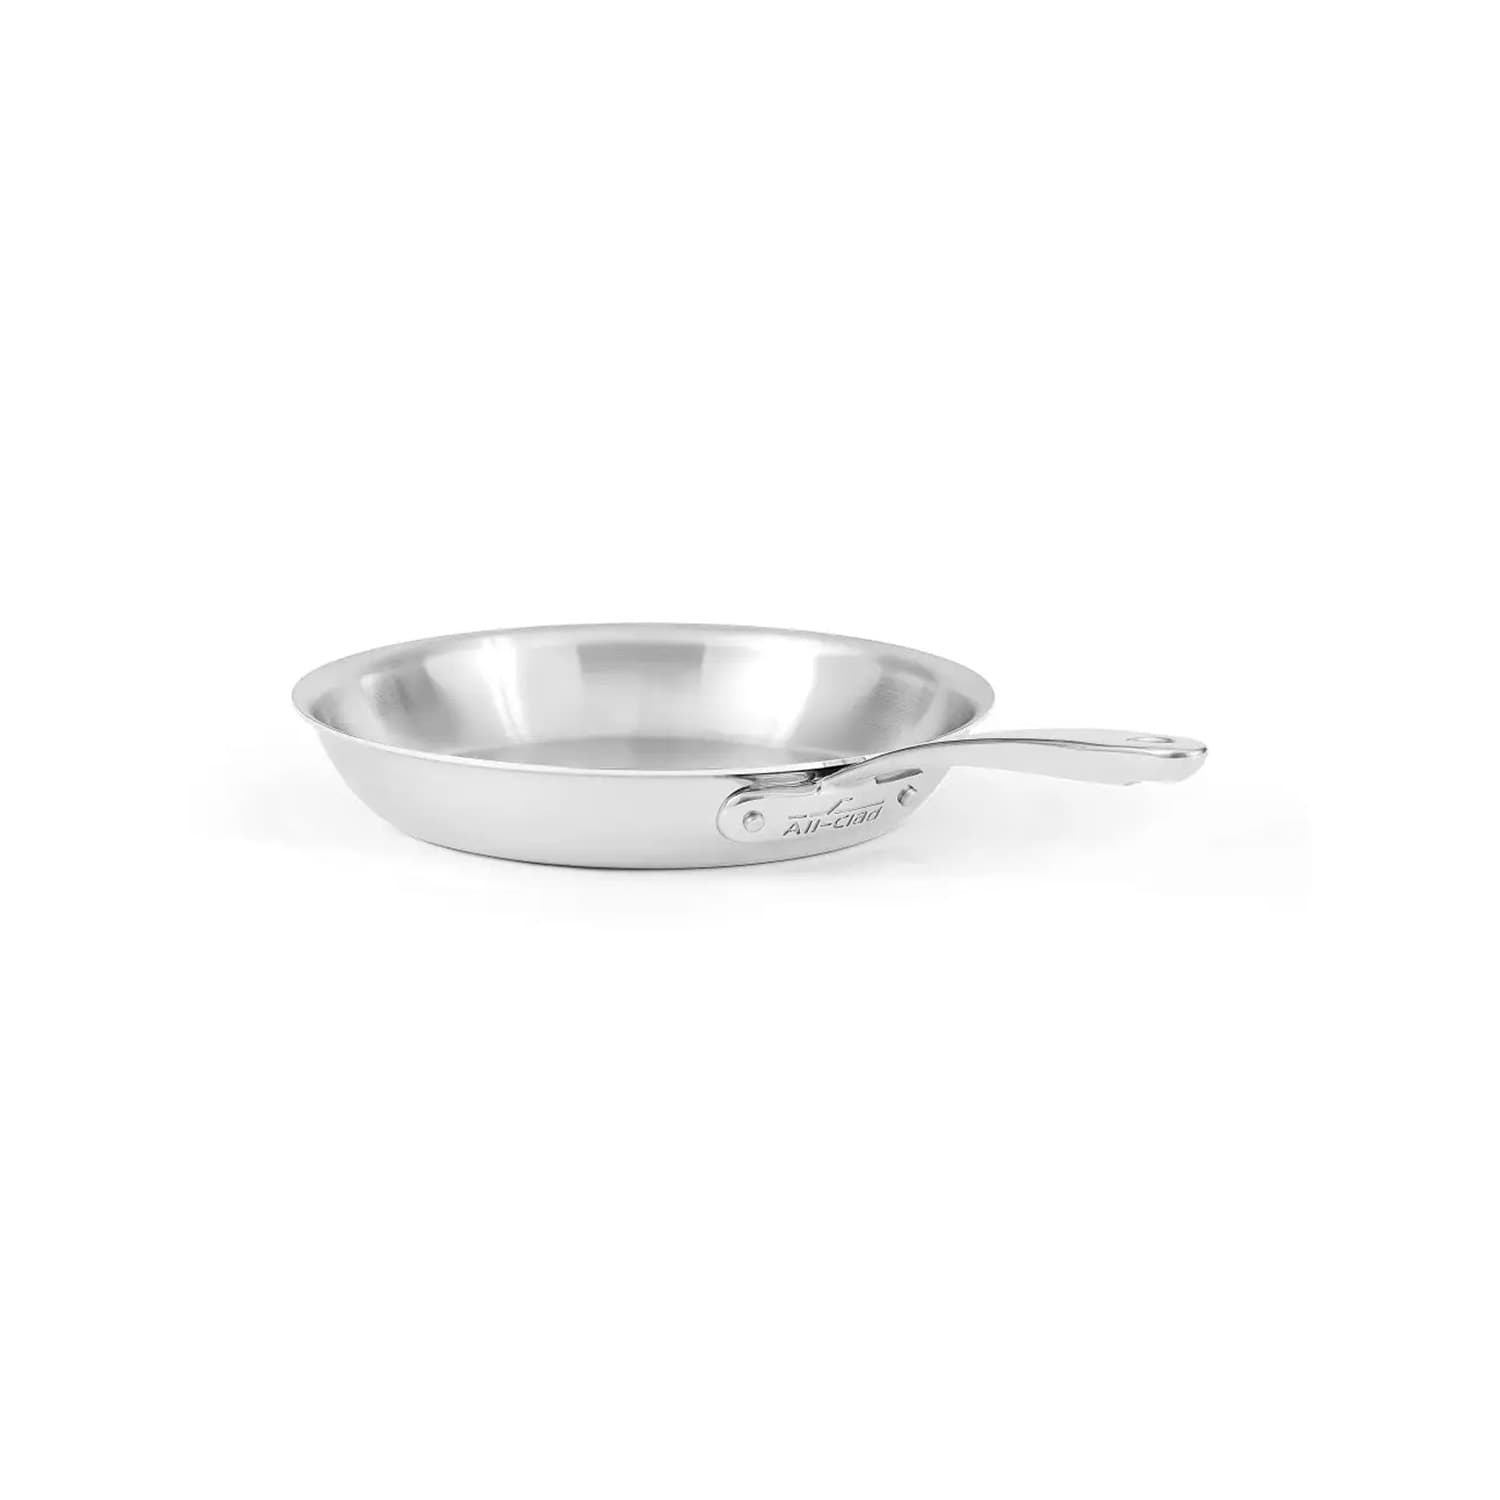 D5 Stainless Polished 5-ply Bonded Cookware, Fry Pan, 10 inch